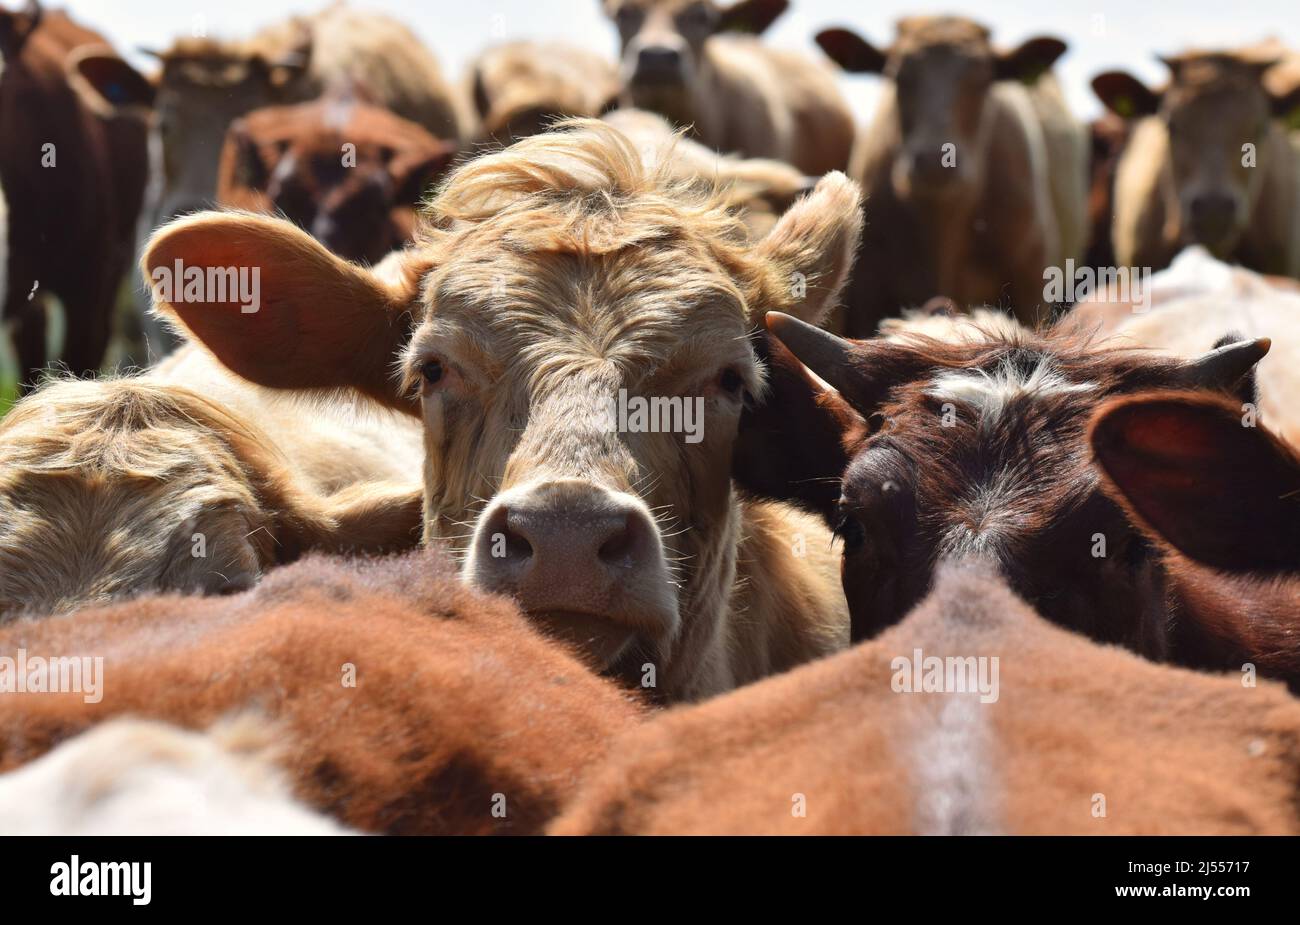 A close up photograph of a herd of British dairy cows facing the camera Stock Photo